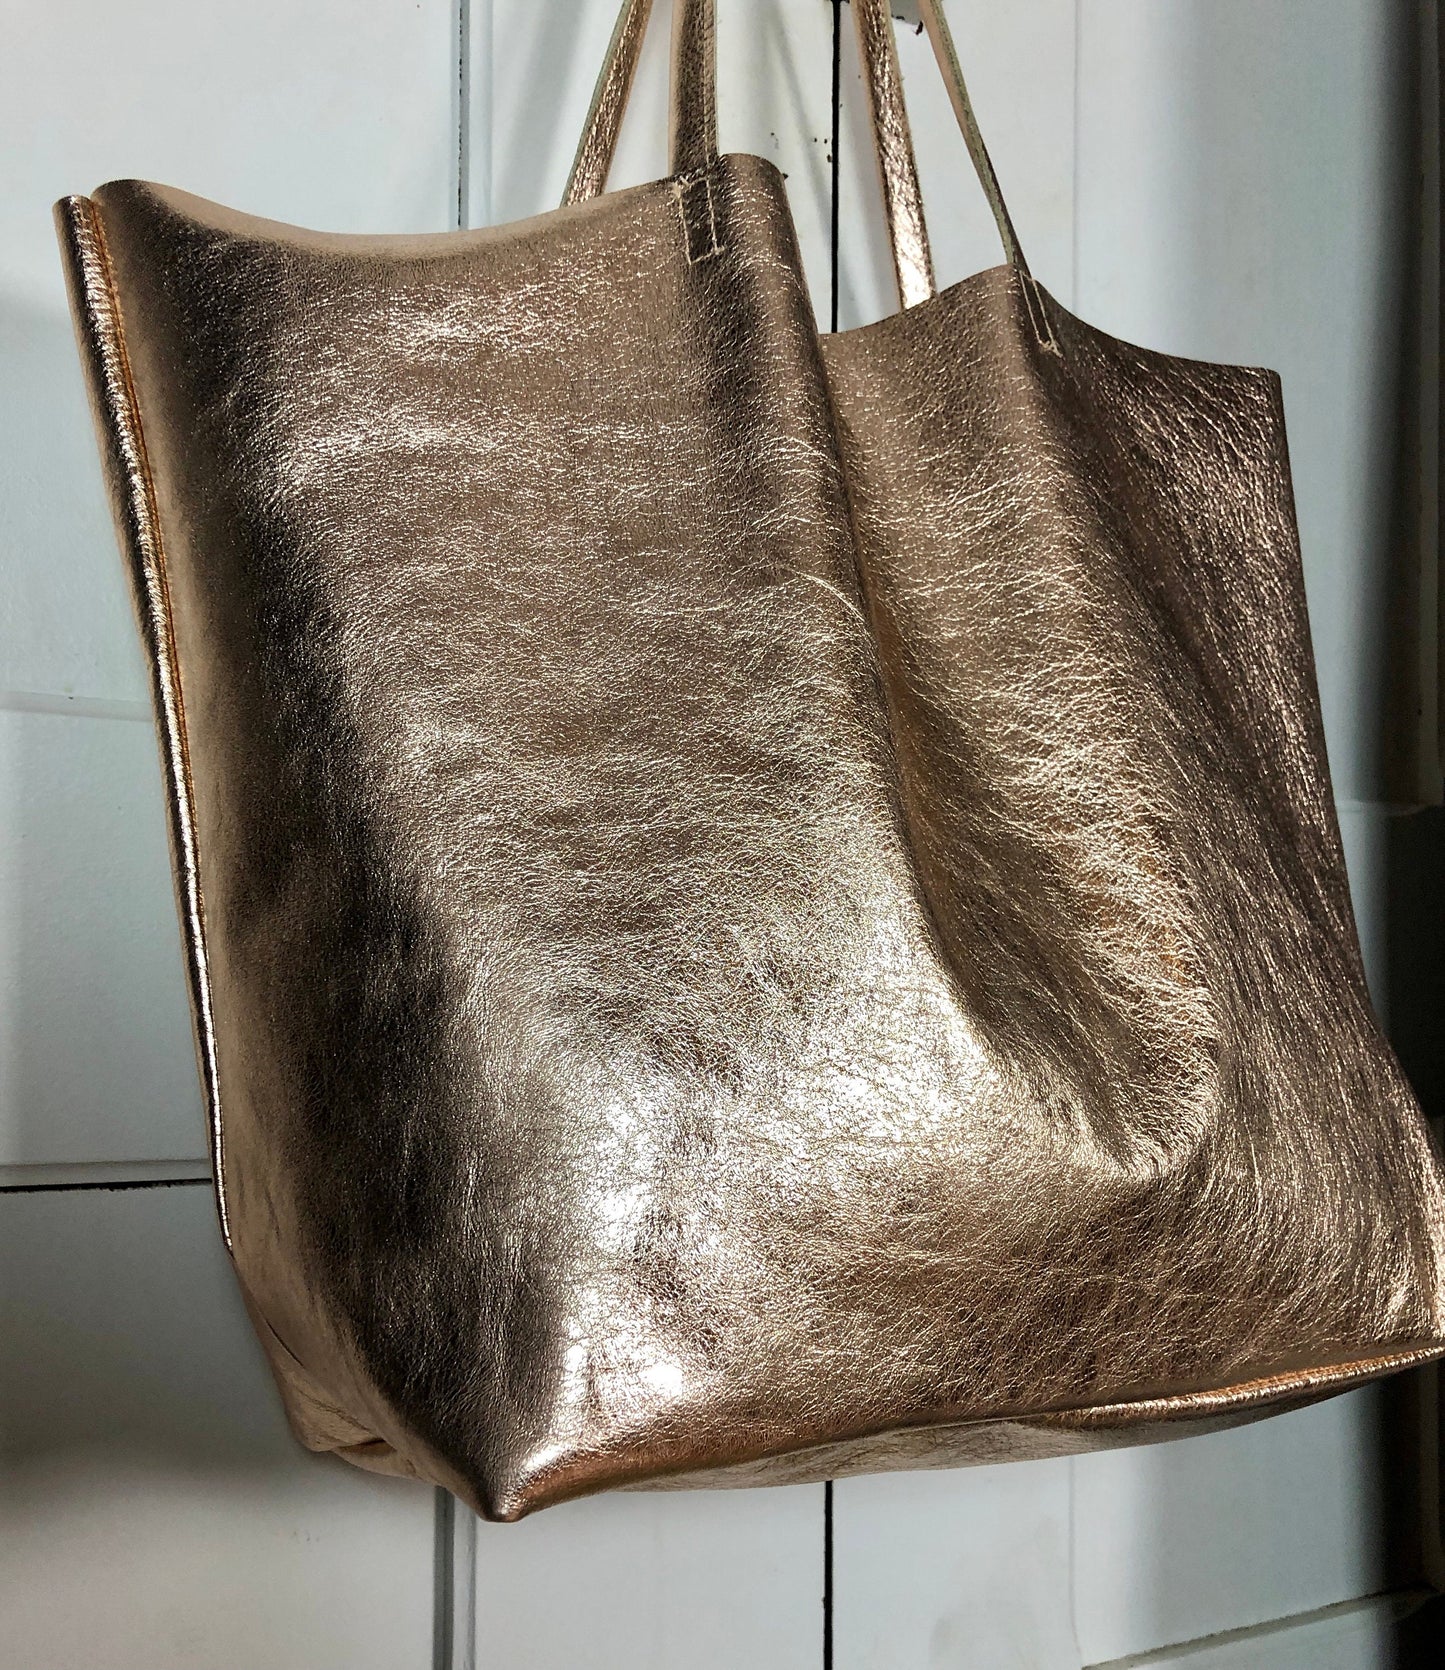 Women's leather bag, large rose gold leather tote, Italian leather bag, rose gold leather tote, women's shoulder tote in soft leather